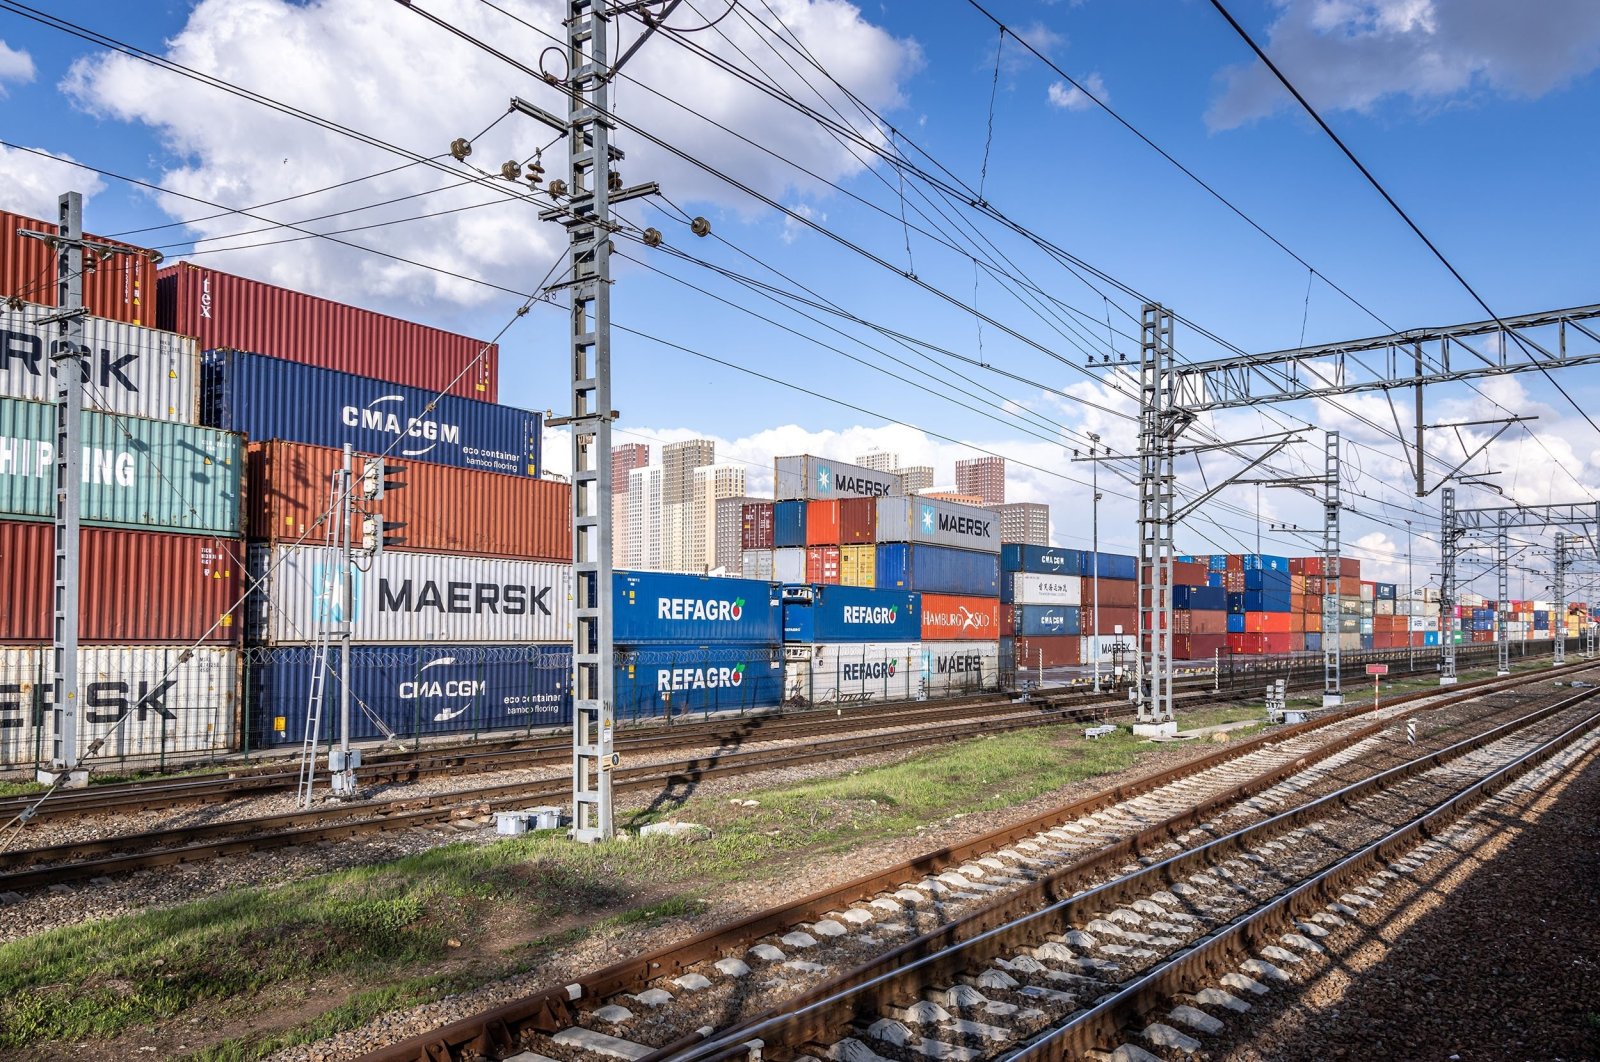 Cargo containers seen in a railway terminal in Moscow, Russia, May 3, 2021. (Shutterstock Photo)